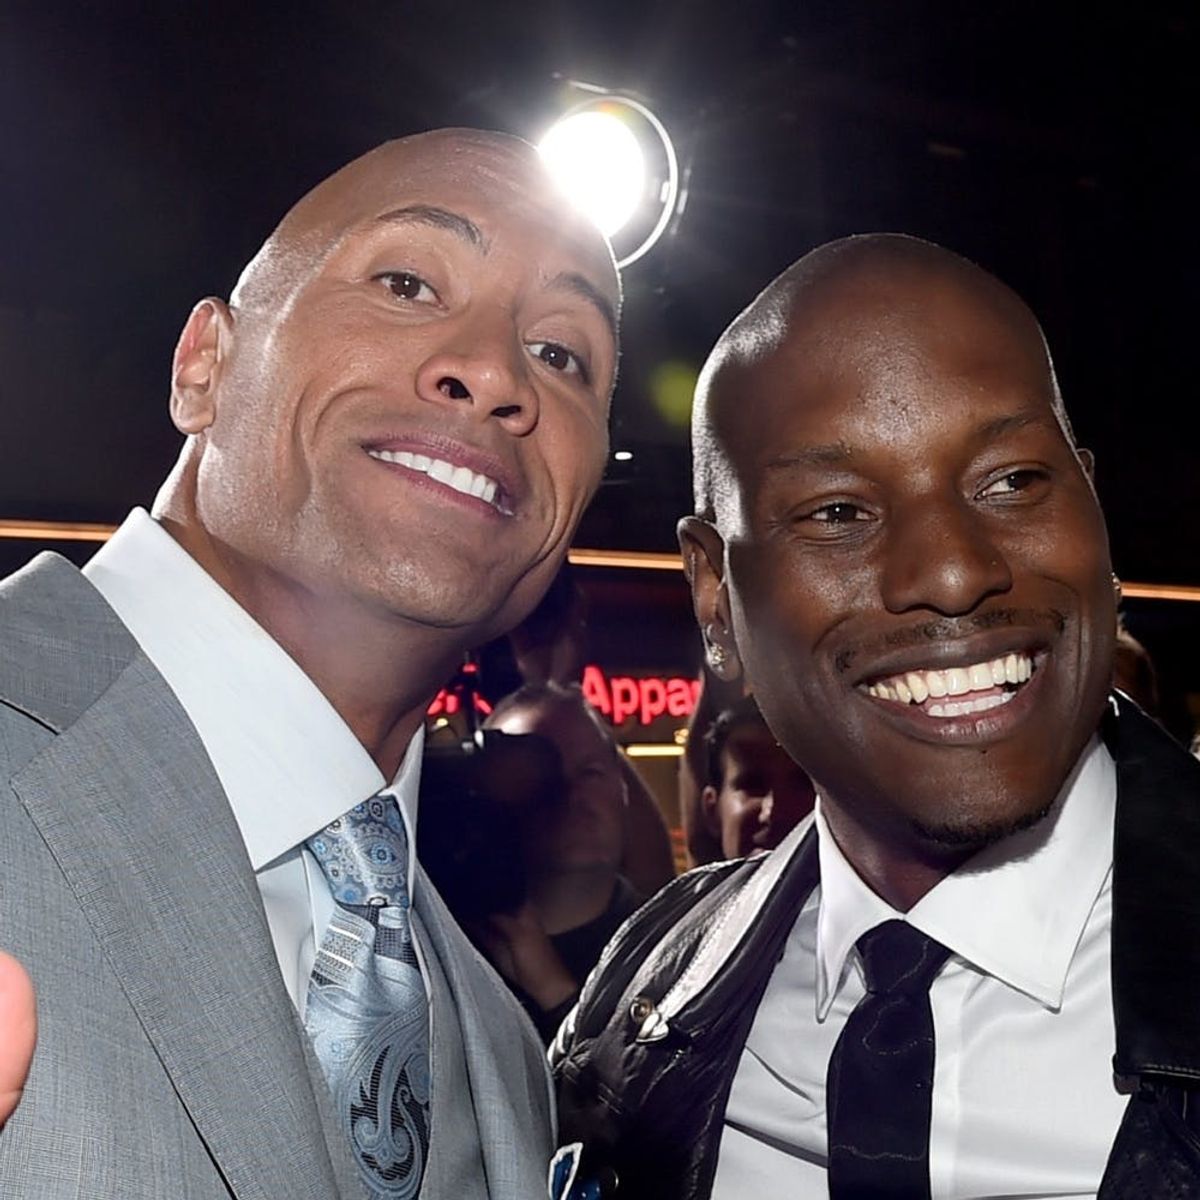 MAJOR Controversy Is Brewing Between Fast and Furious Costars Tyrese Gibson and Dwayne Johnson